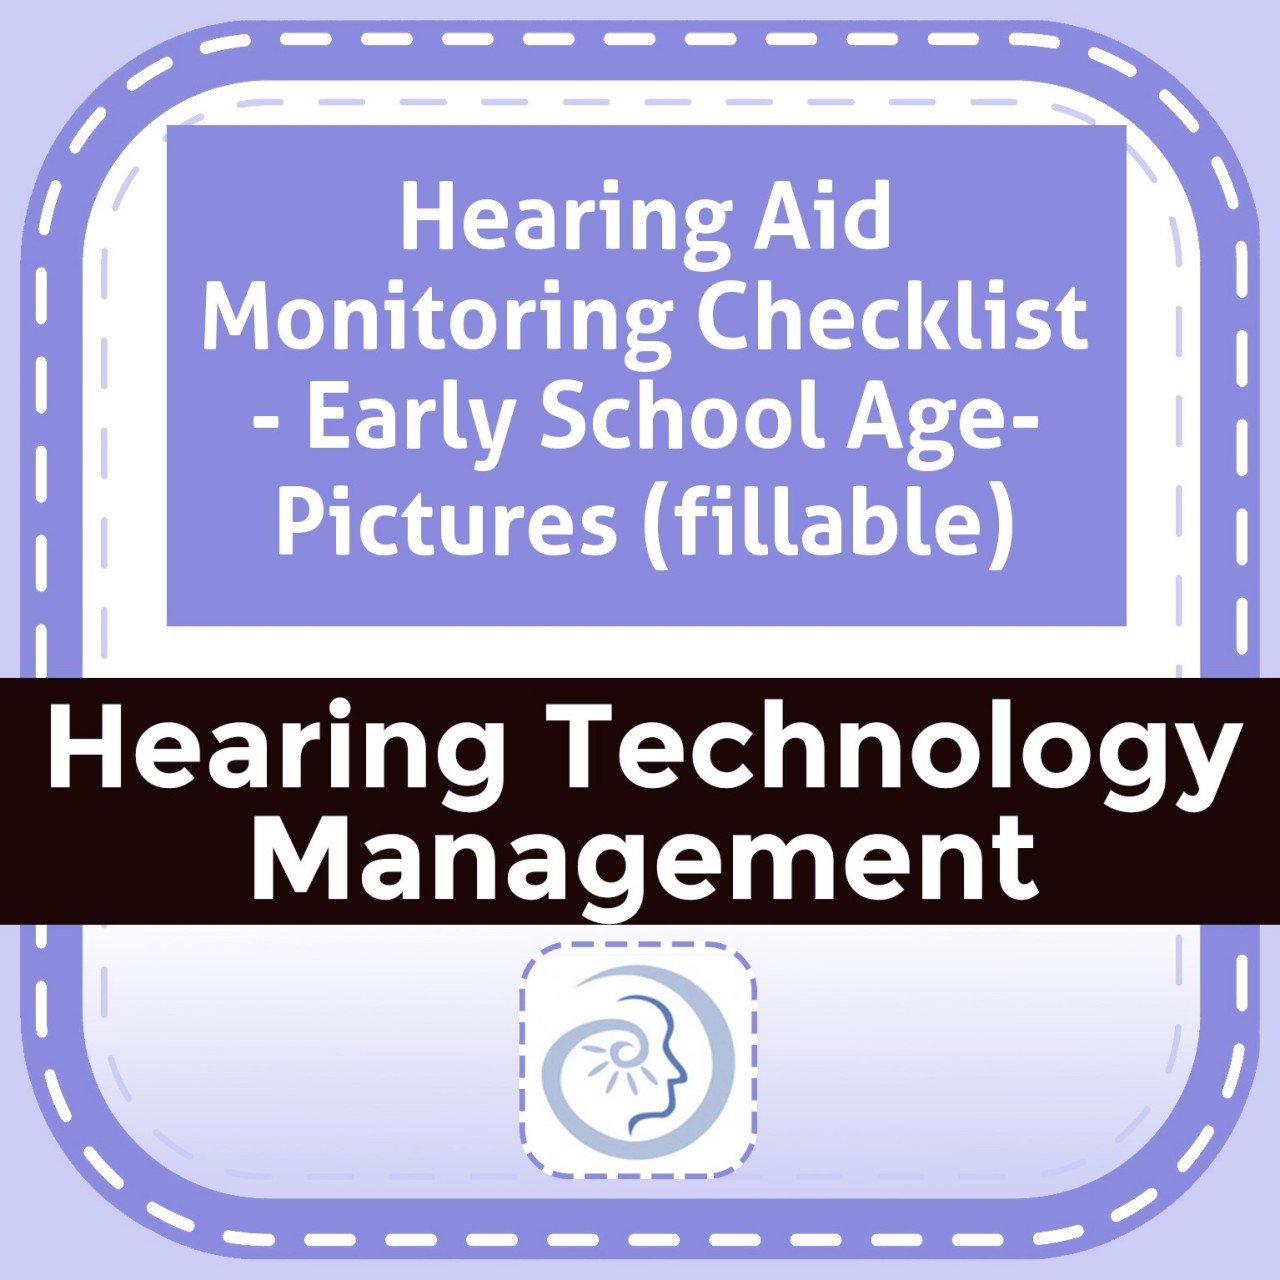 Hearing Aid Monitoring Checklist - Early School Age- Pictures (fillable)